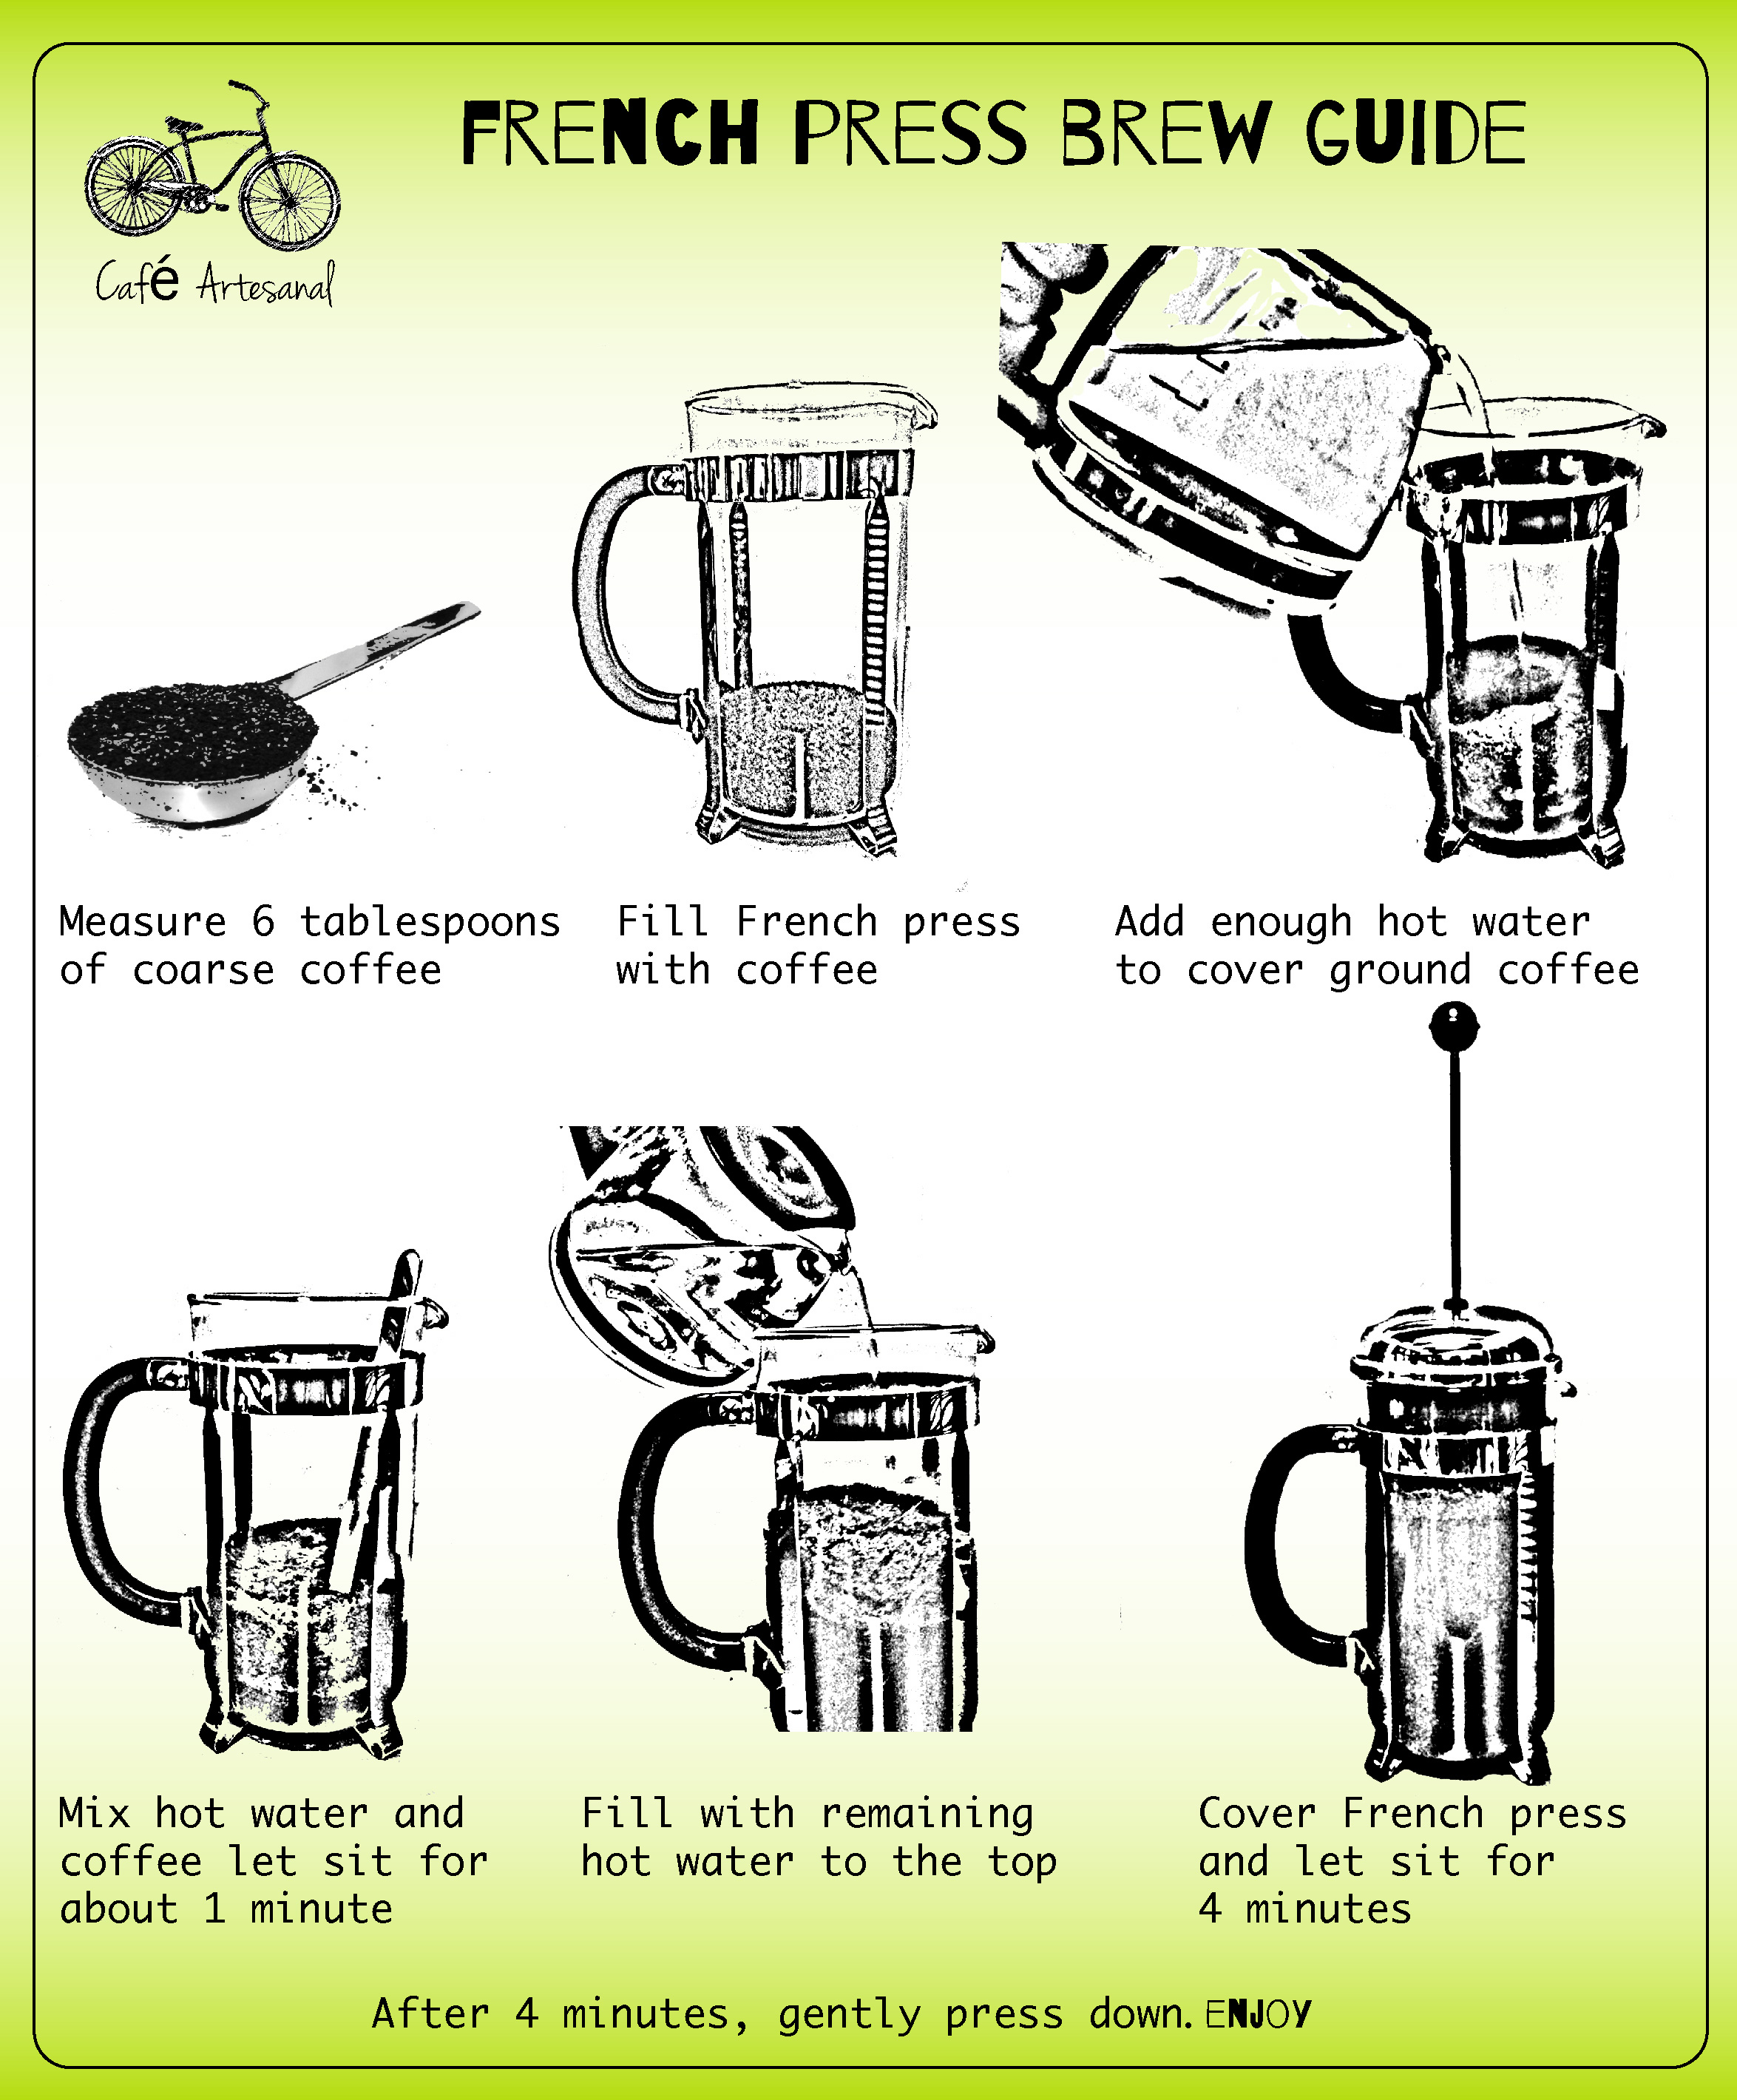 https://www.goldenbean.net/product_images/uploaded_images/french-press-brew-guide2.jpg